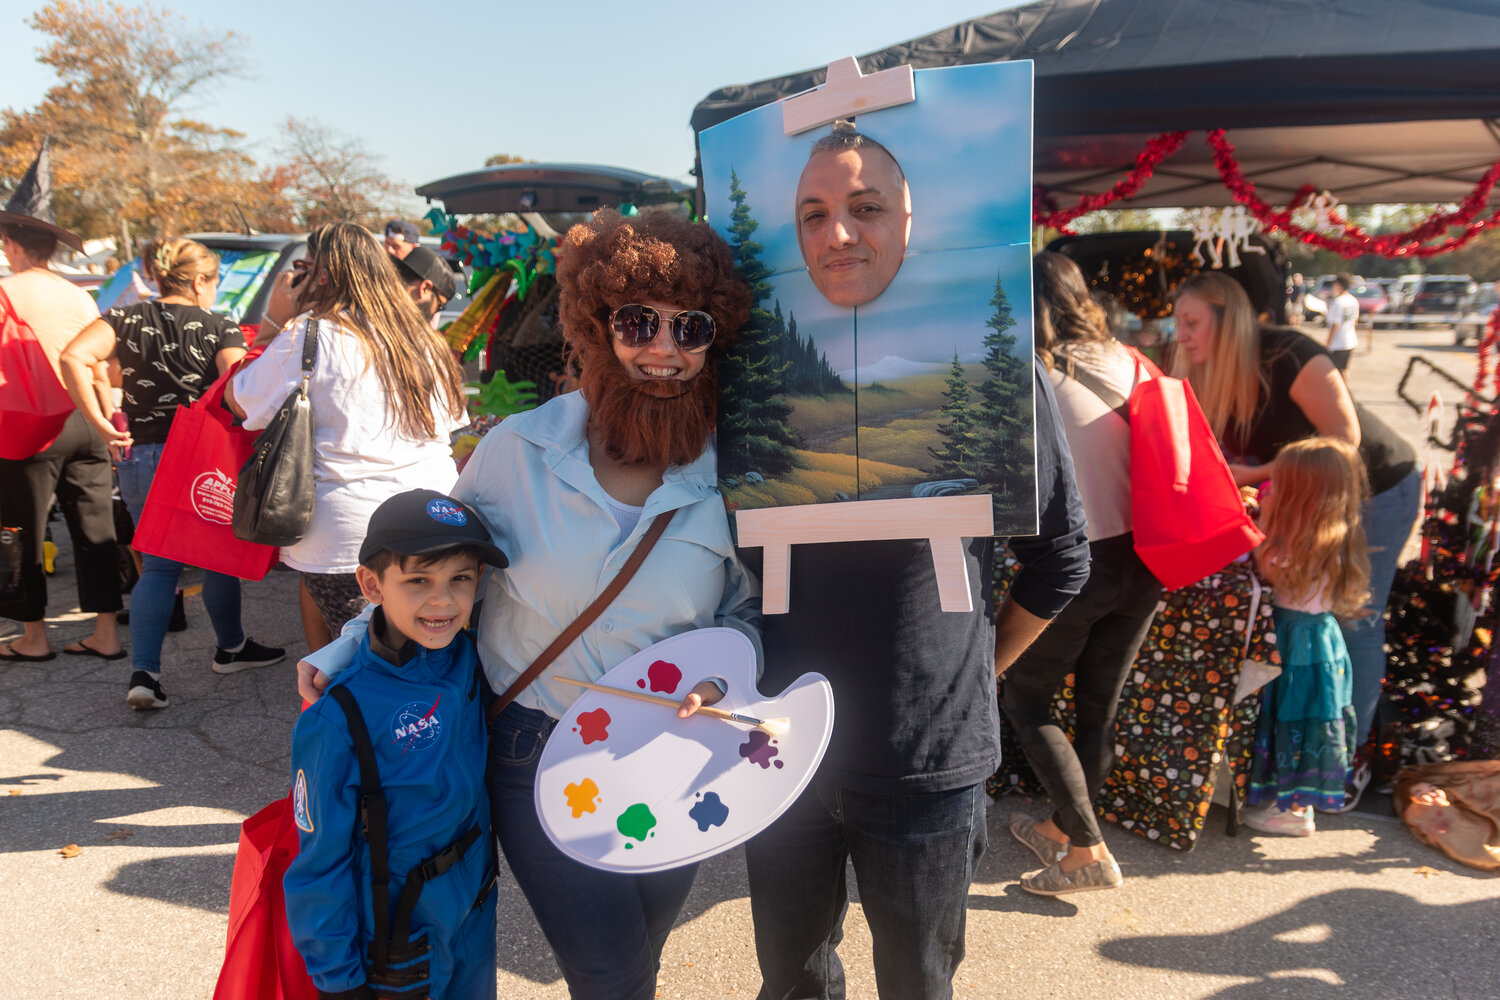 Parents David and Christina Kinares in a Bob Ross costume while their son, Dario, 7, dressed as an astronaut.